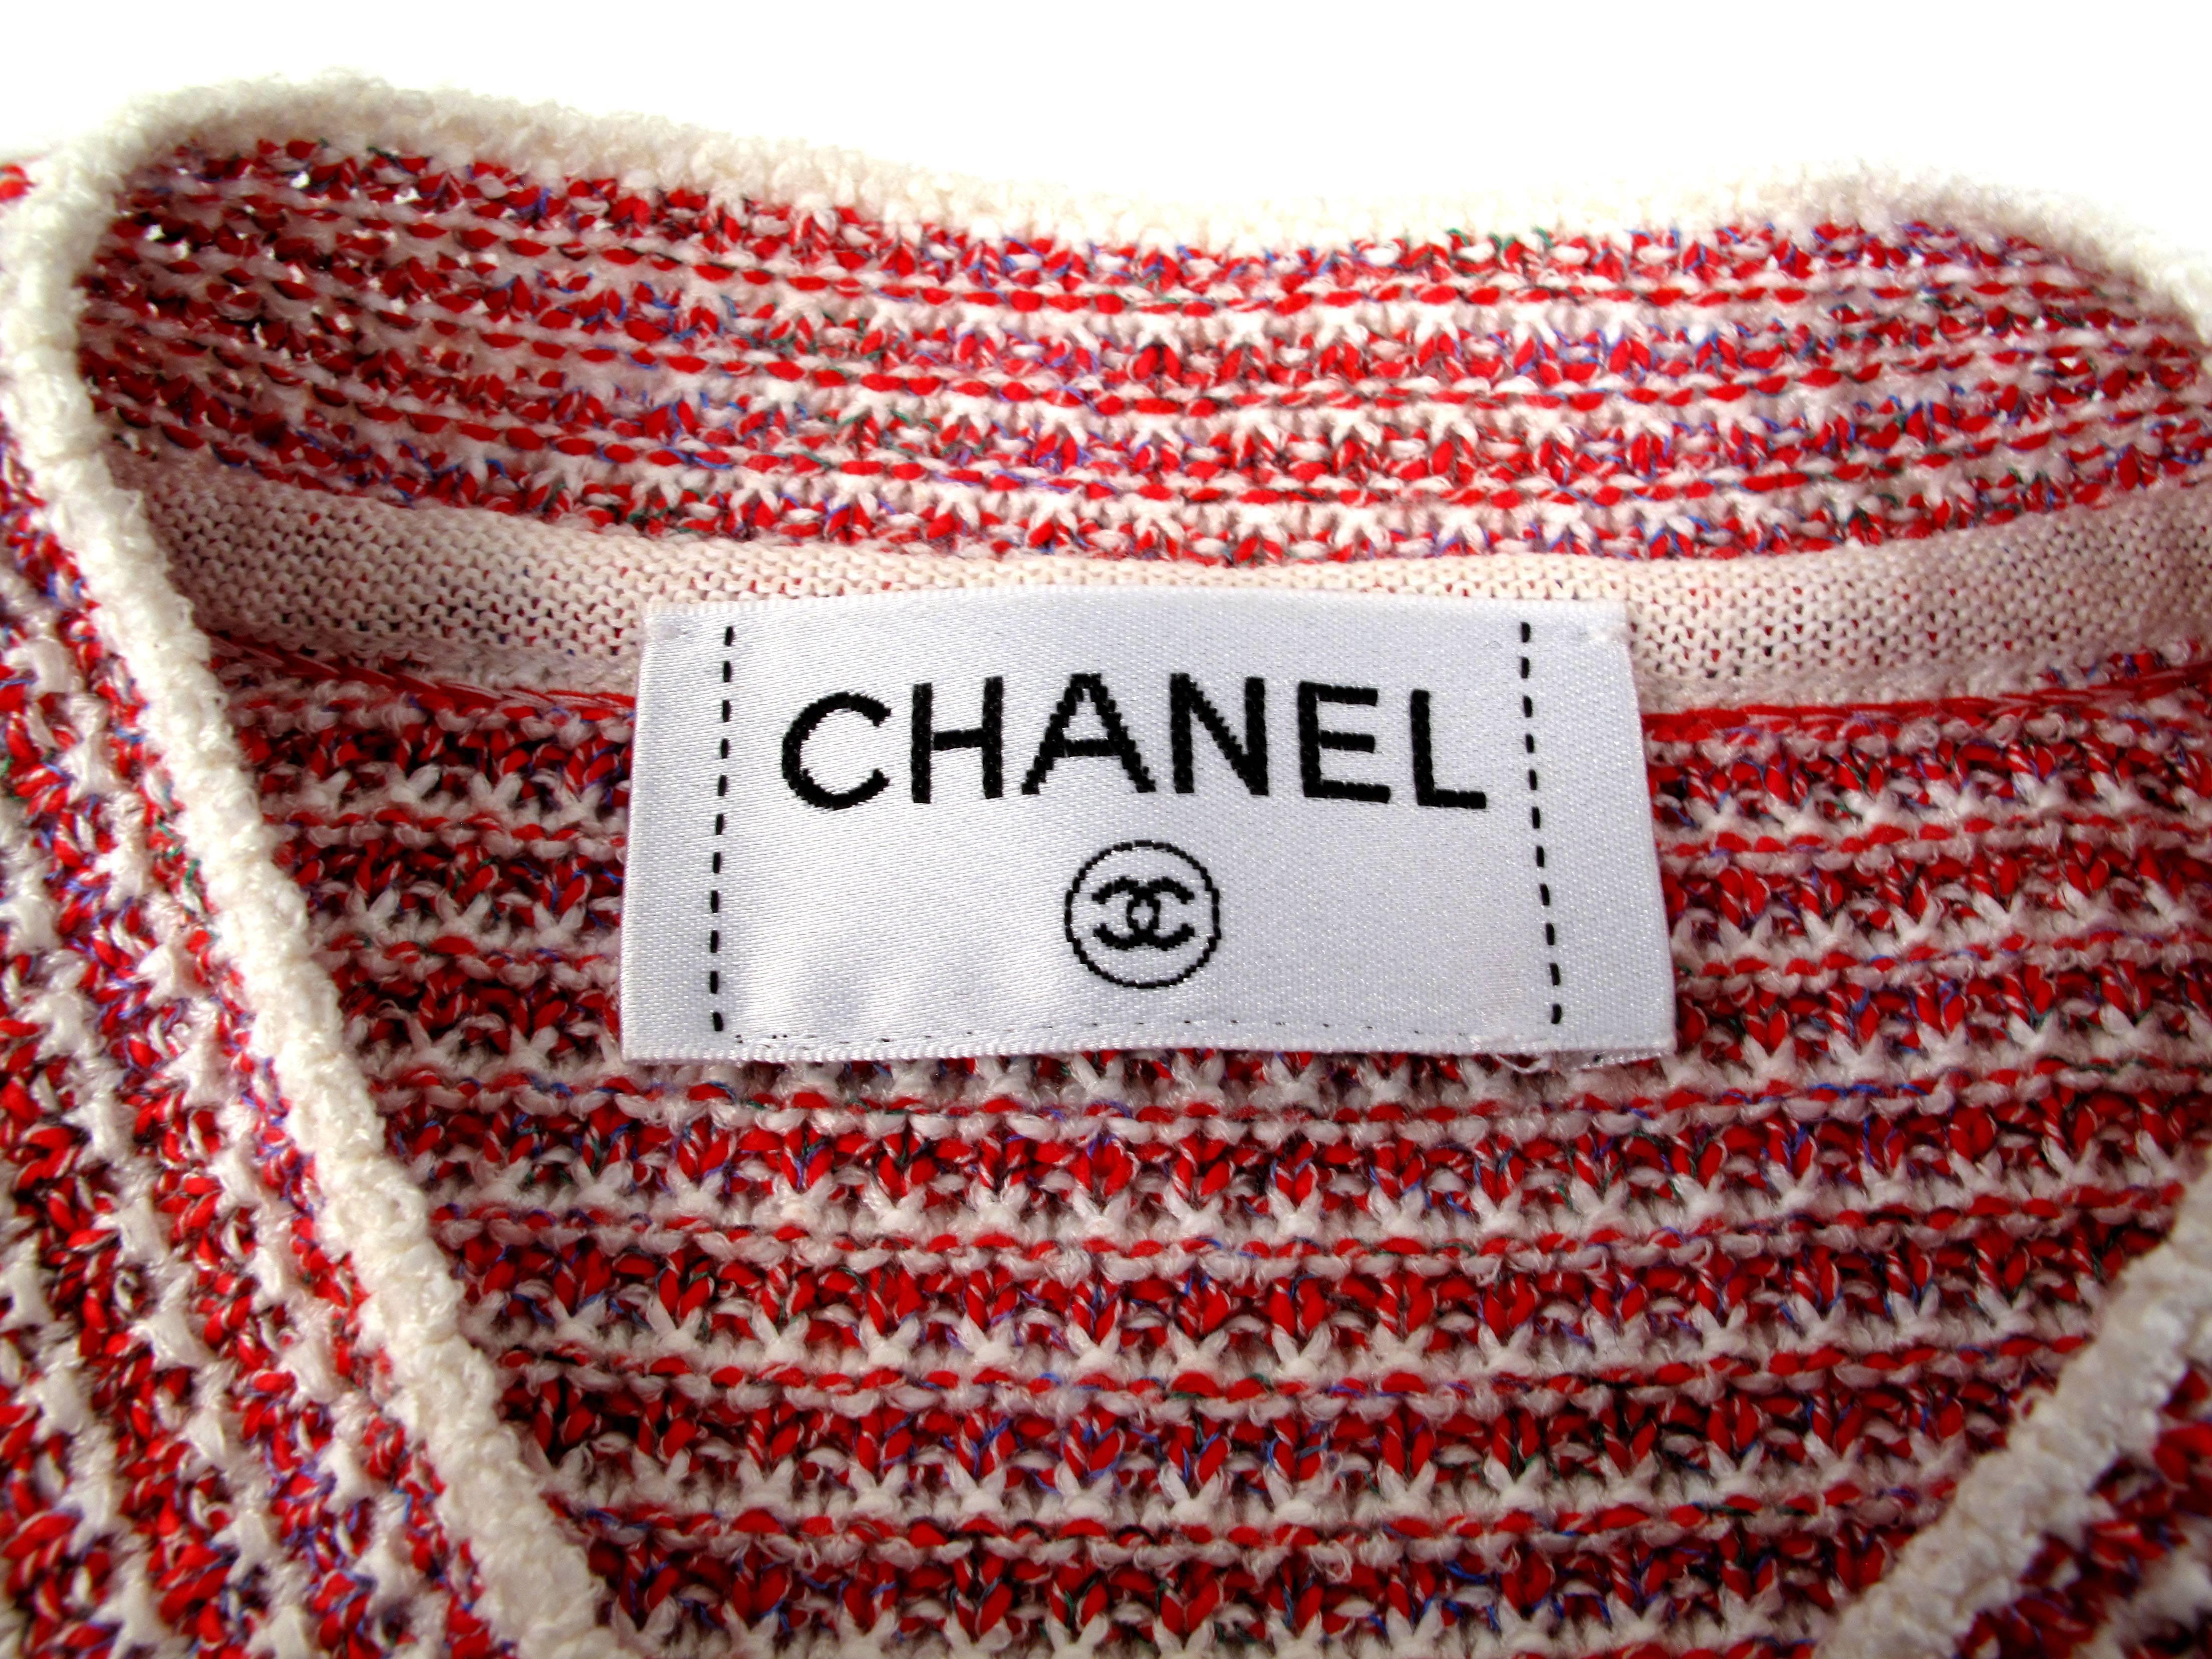 Chanel 2014 Pearl Jacket Cardigan - US 10 / 12 - 44 - Striped Red White Coat CC 2